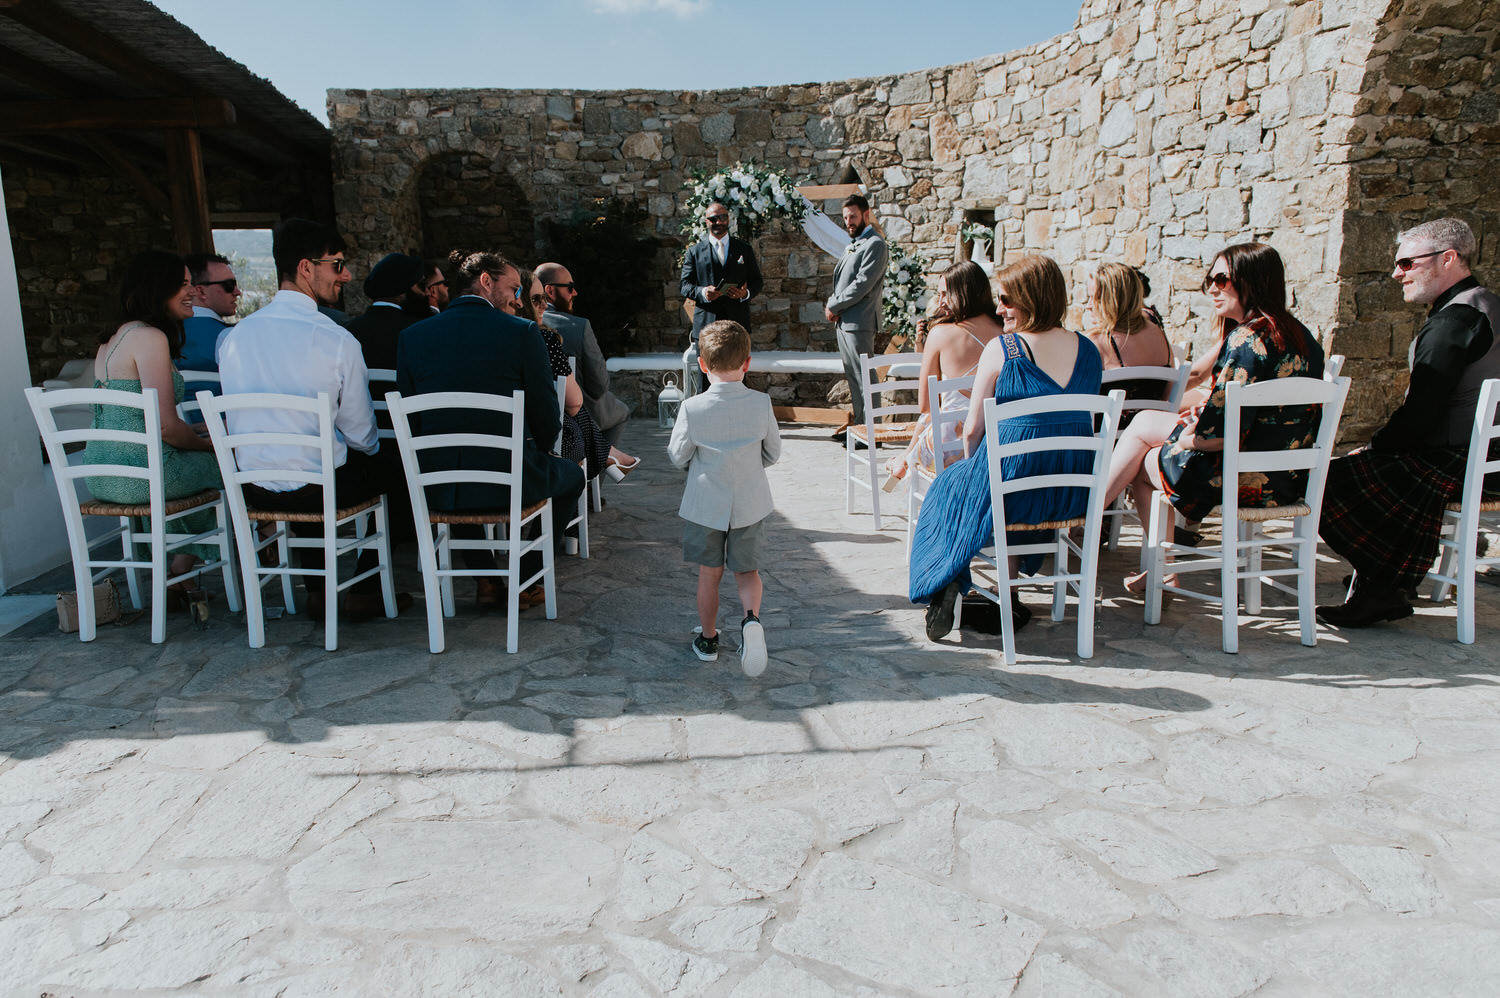 Mykonos wedding photographer: panoramic photo of the little ring bearer walking up the aisle as the guests look at him smiling.